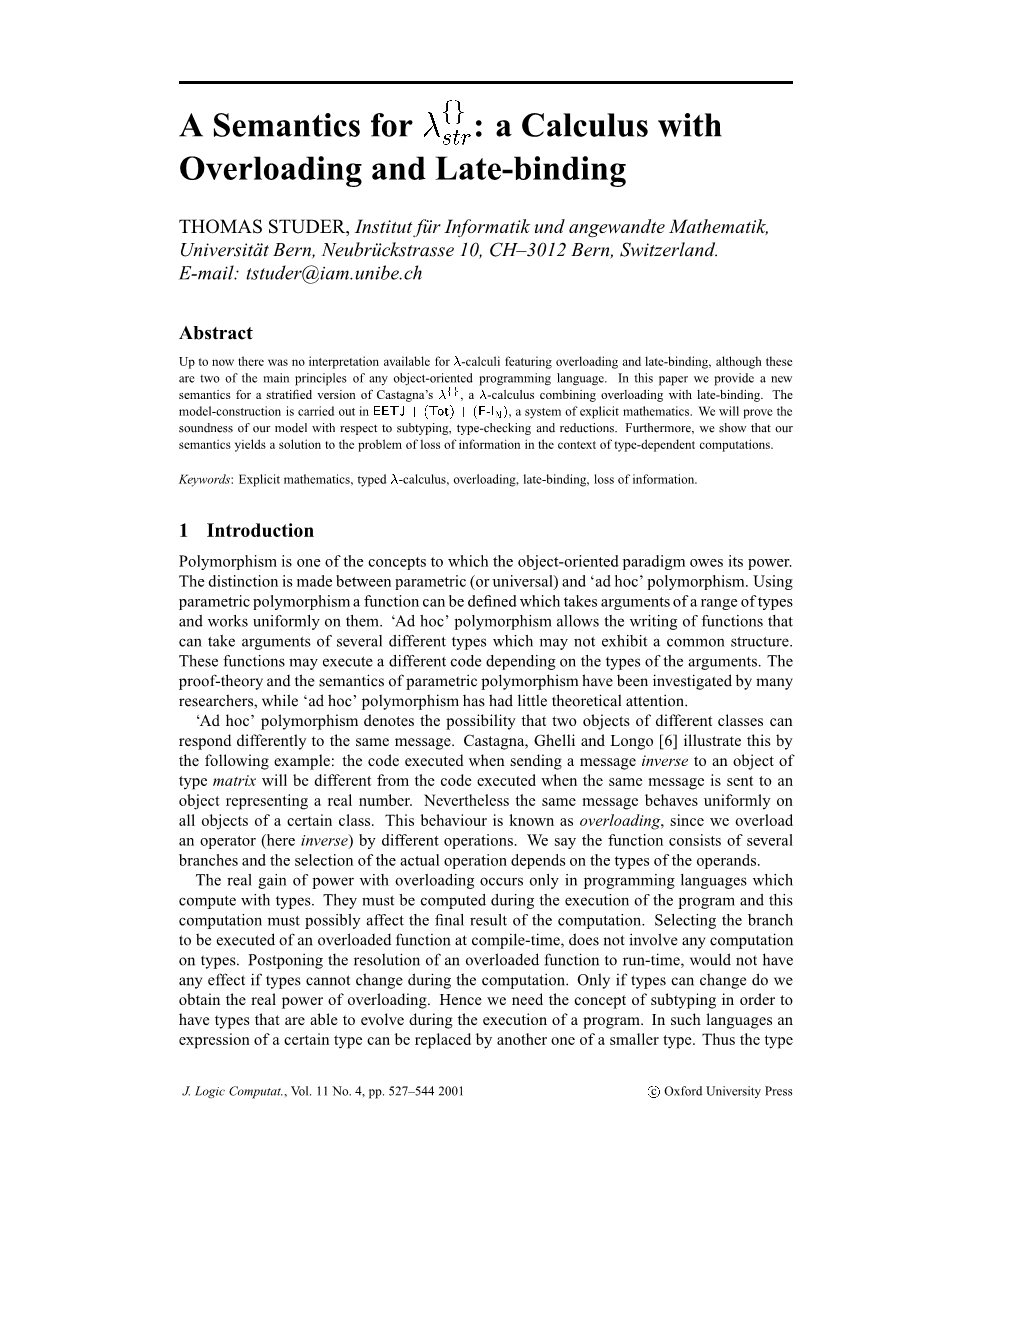 A Calculus with Overloading and Late-Binding